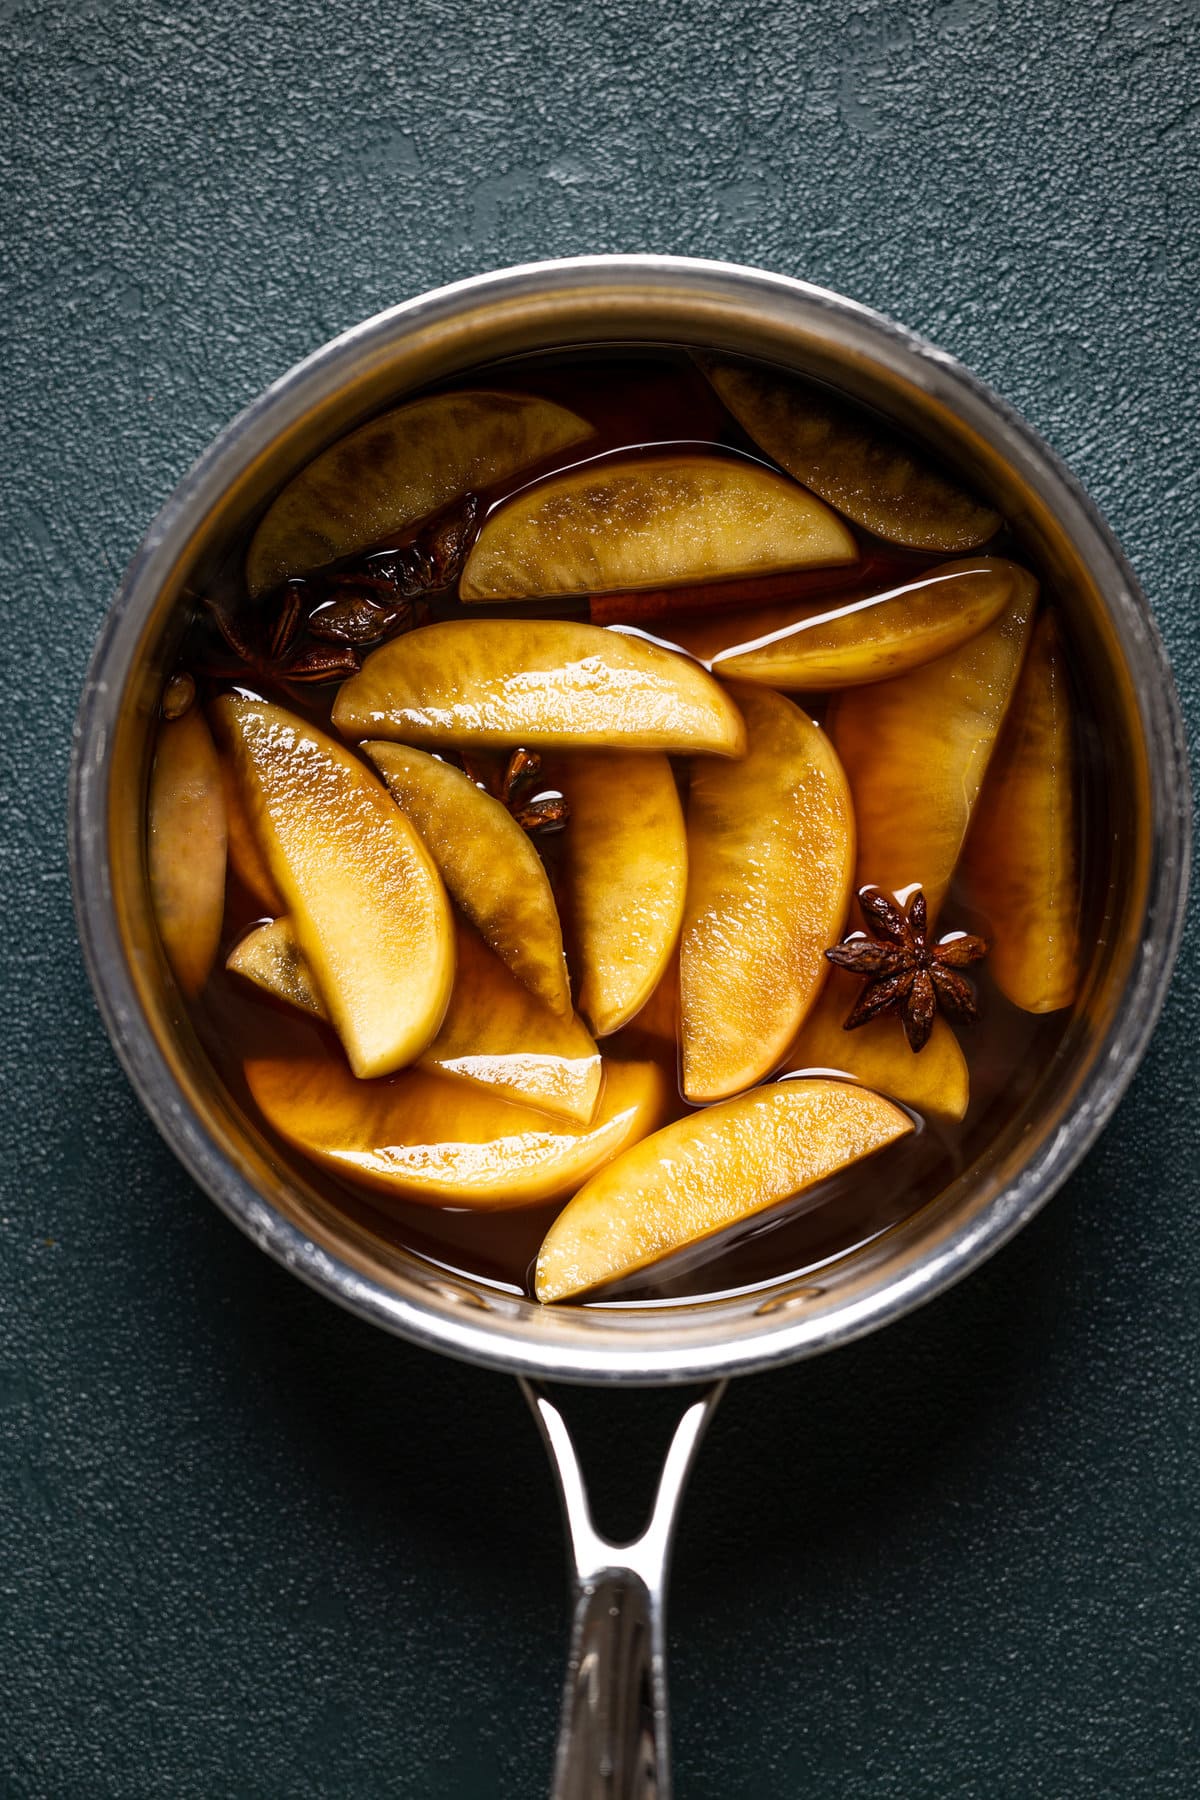 Apple slices sitting in a pan with water and spices